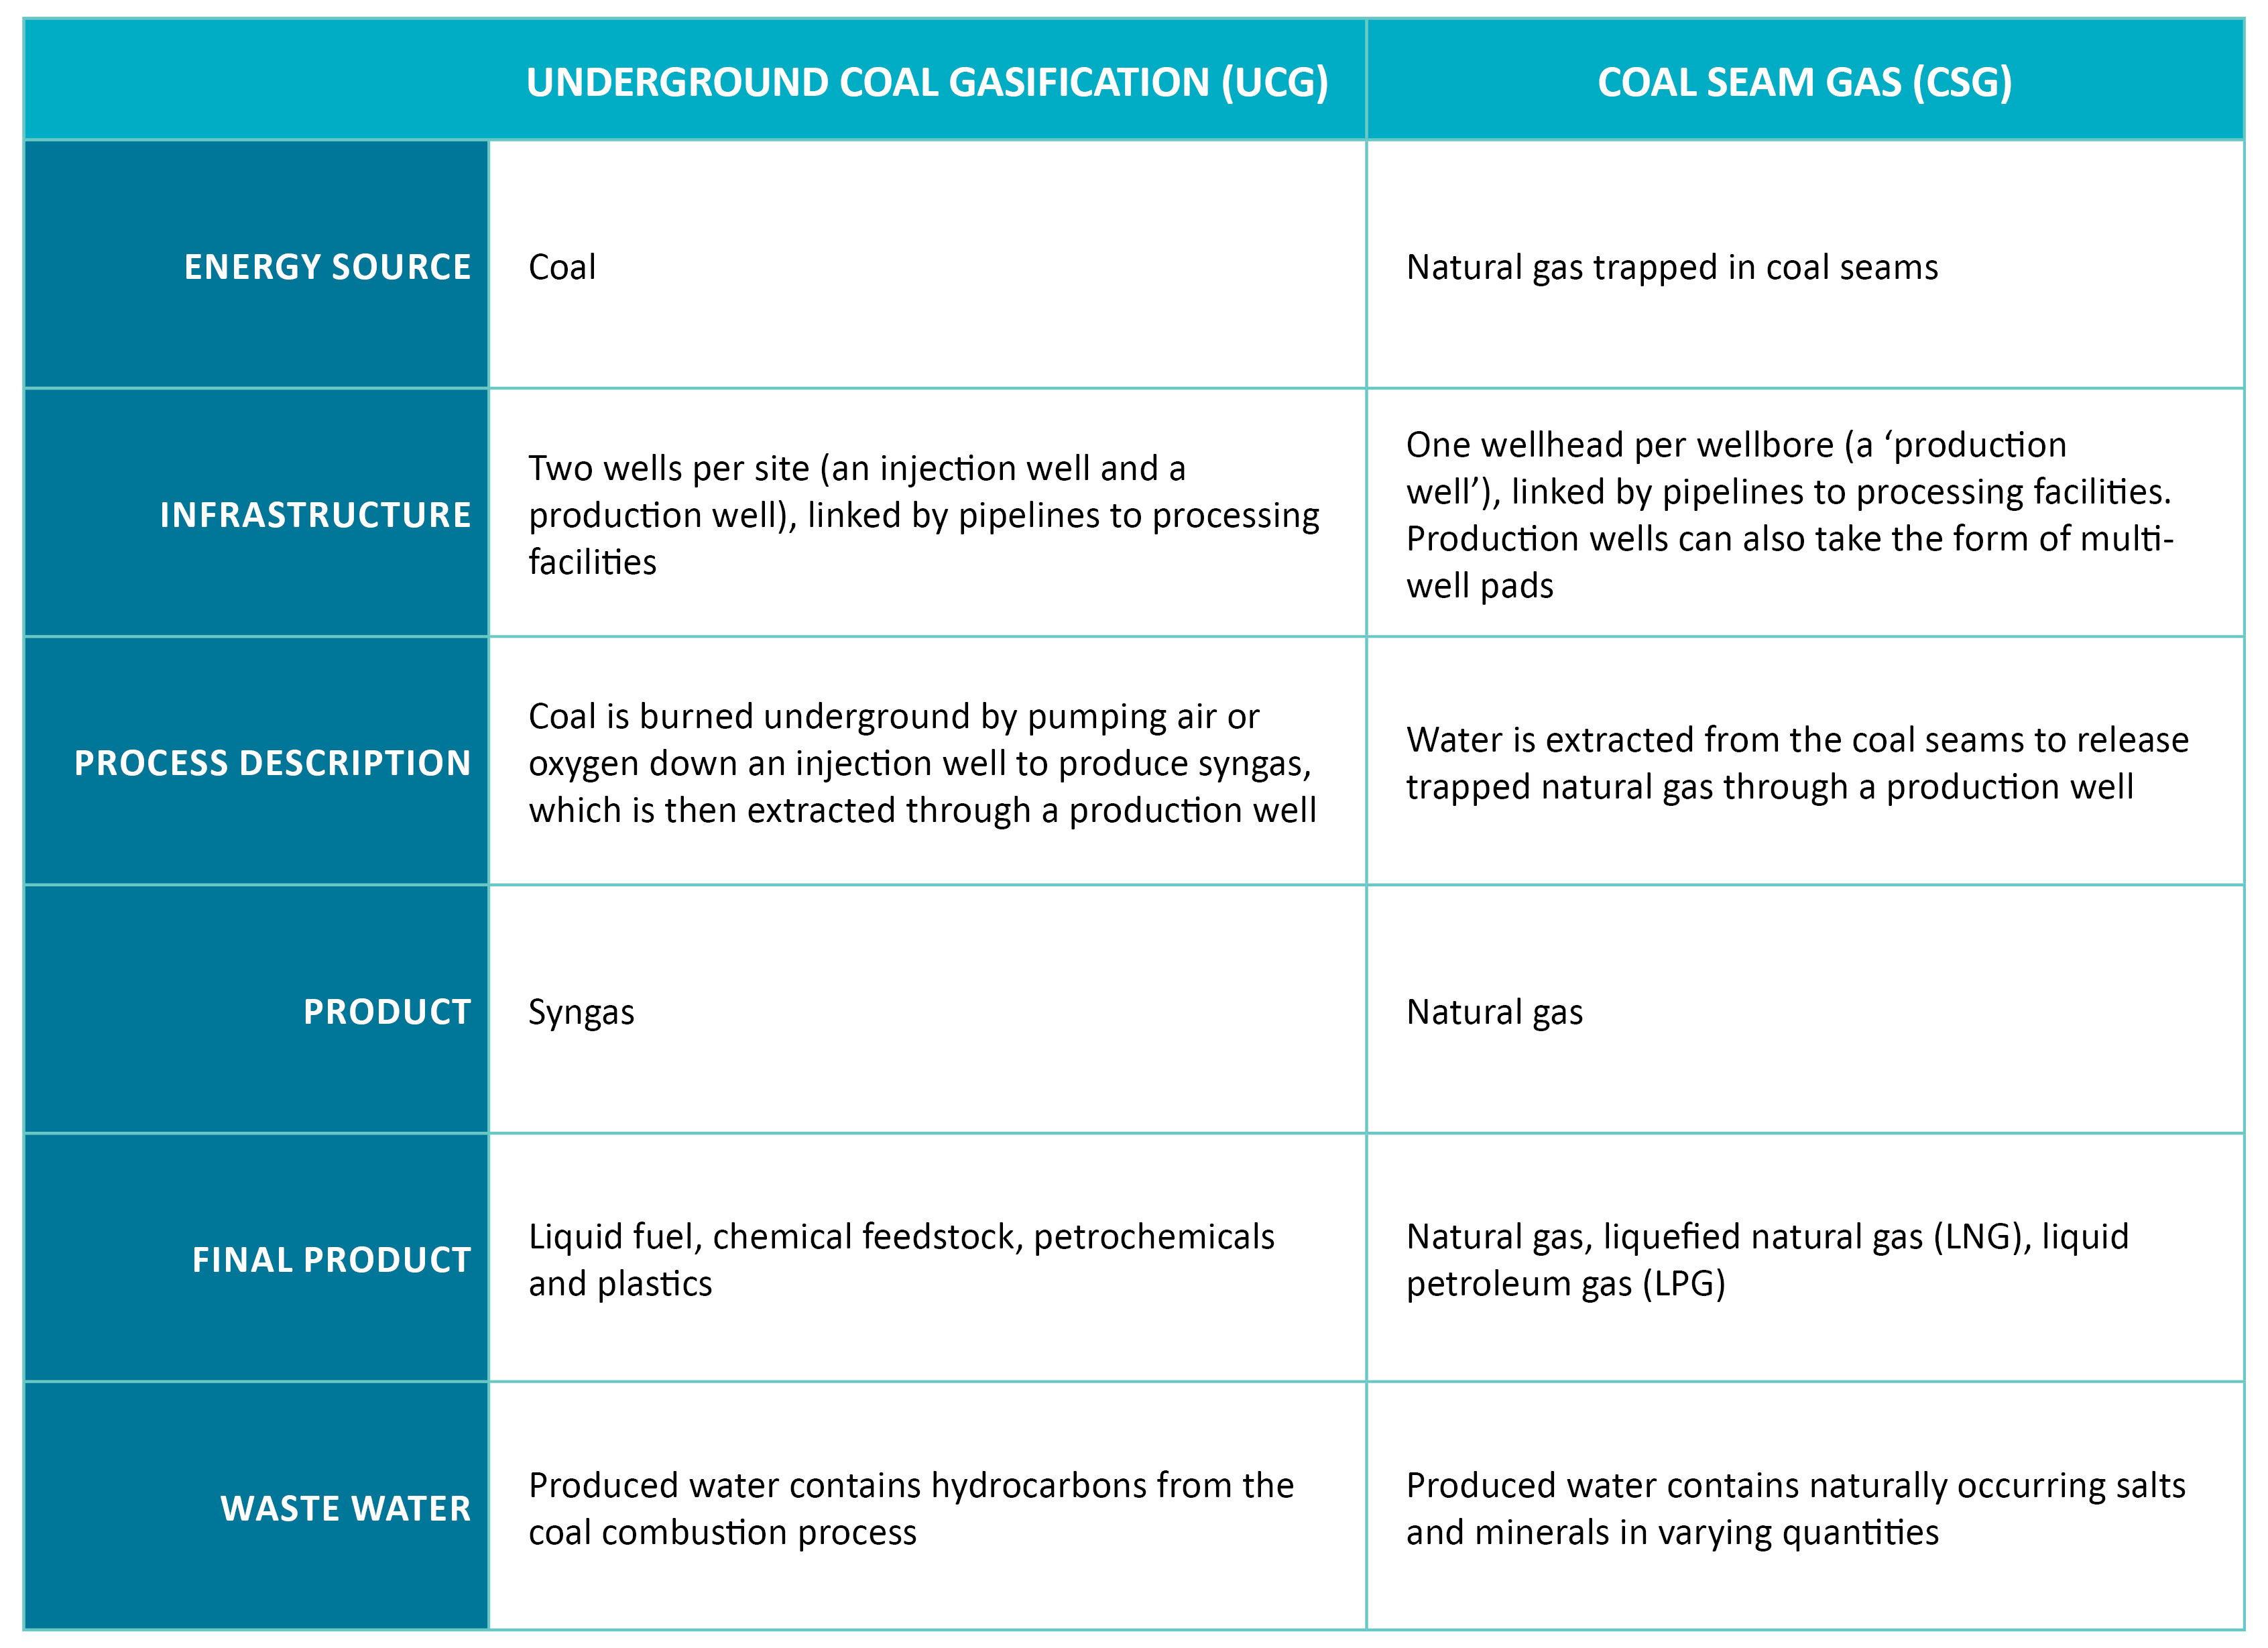 What’s the difference between Underground Coal Gasification (UCG) and Coal Seam Gas (CSG)?